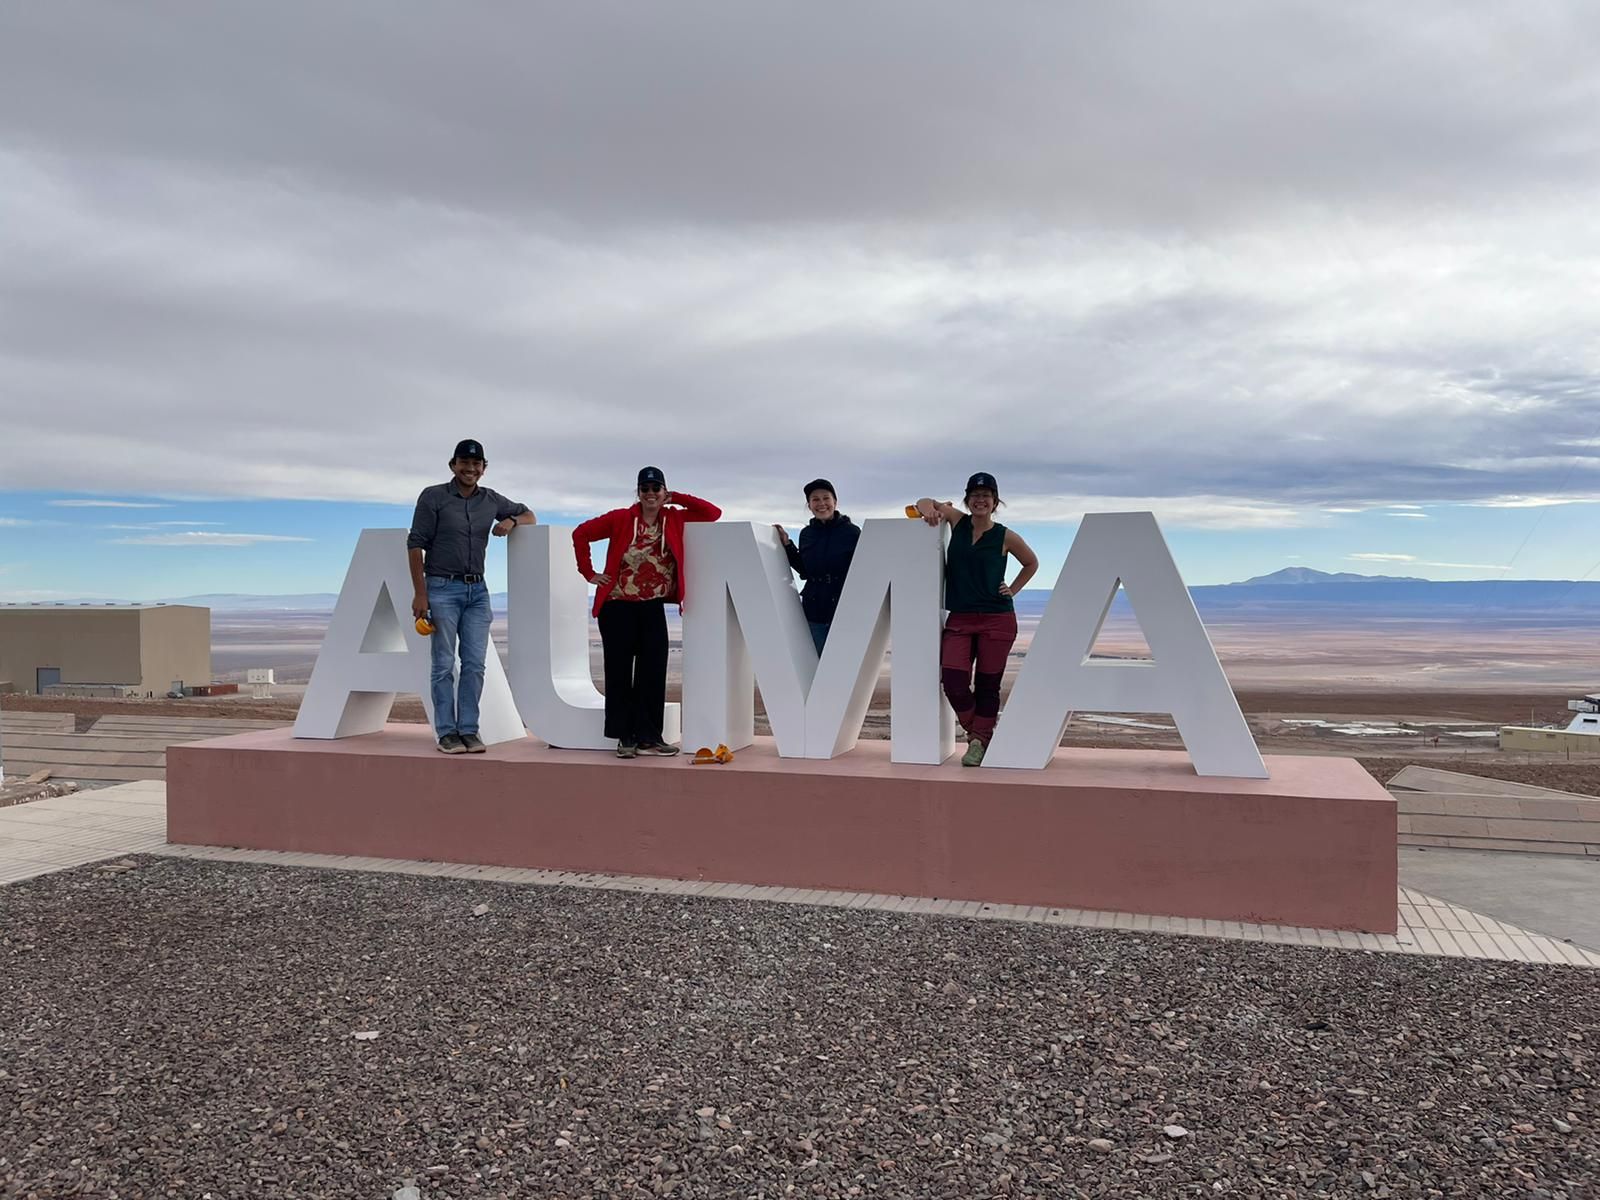 Scientists posing at the ALMA facility in front of the beautiful Atacama desert. From left to right: Luis Ramirez Camargo, Marianna Zeyringer, Maria Luisa Lode, Isabelle Viole.
&amp;#160;